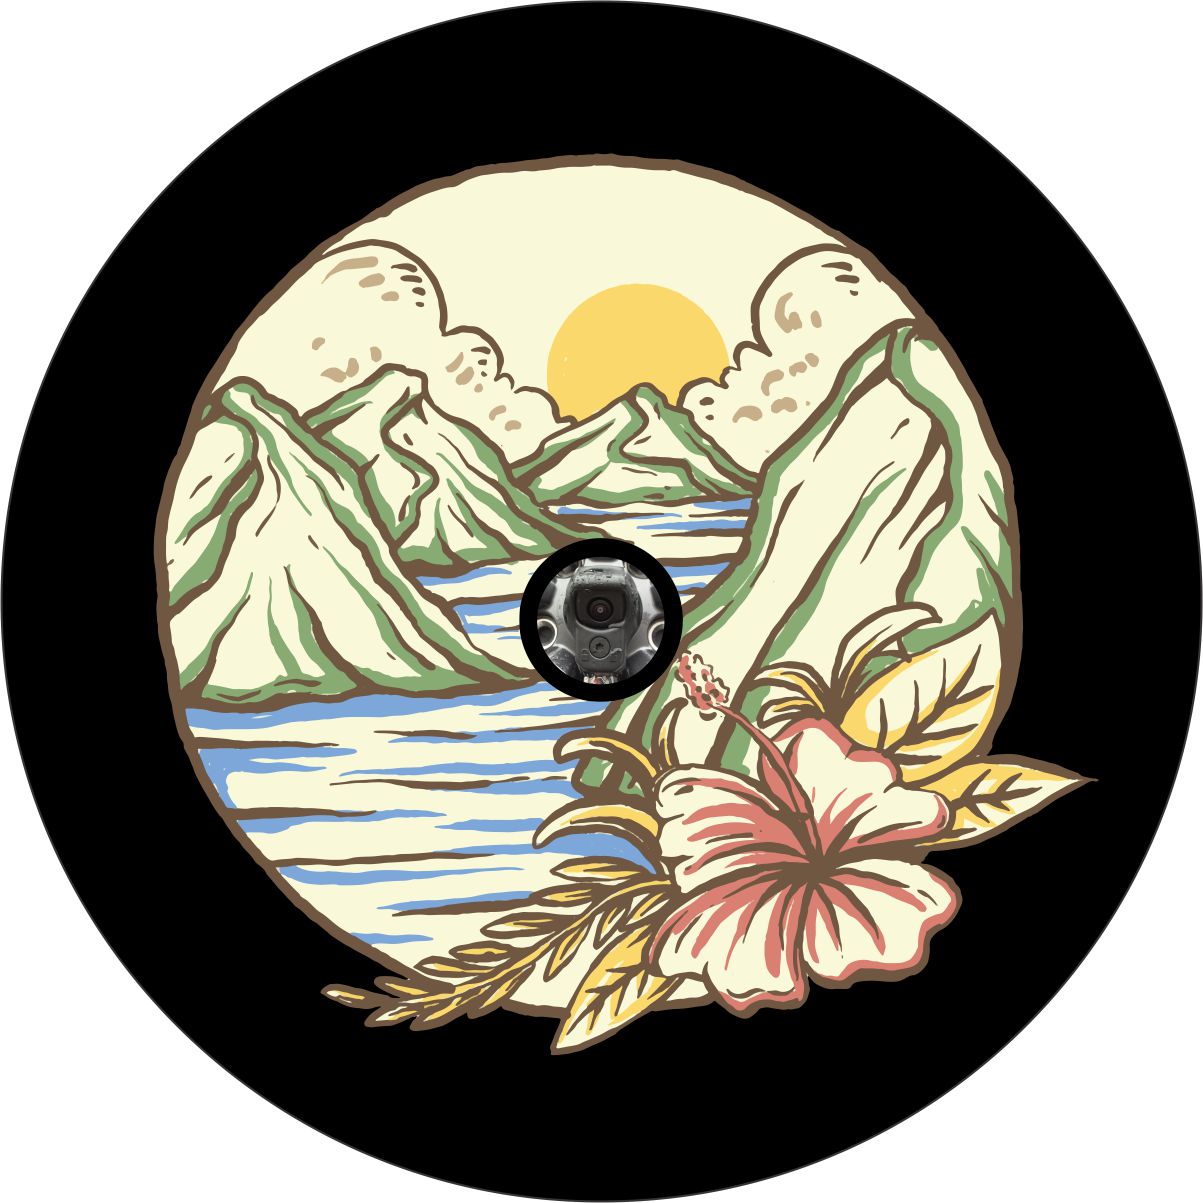 Spare tire cover for back up camera. Vintage style hand drawn spare tire cover design of the sea running between the mountains at sunset with a beautiful tropical hibiscus flower